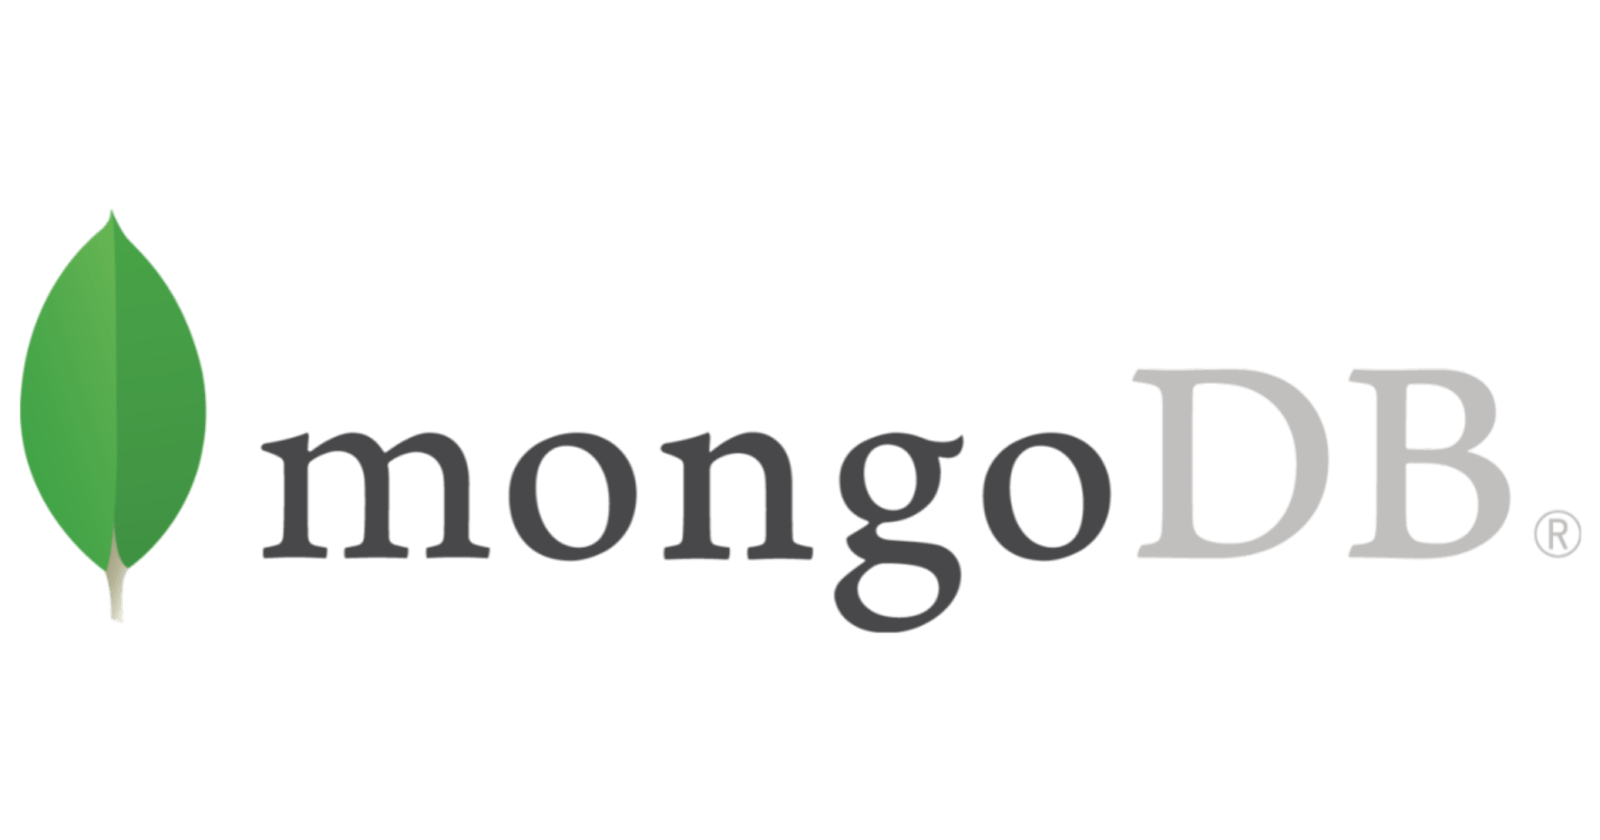 MongoDB - A complete reference